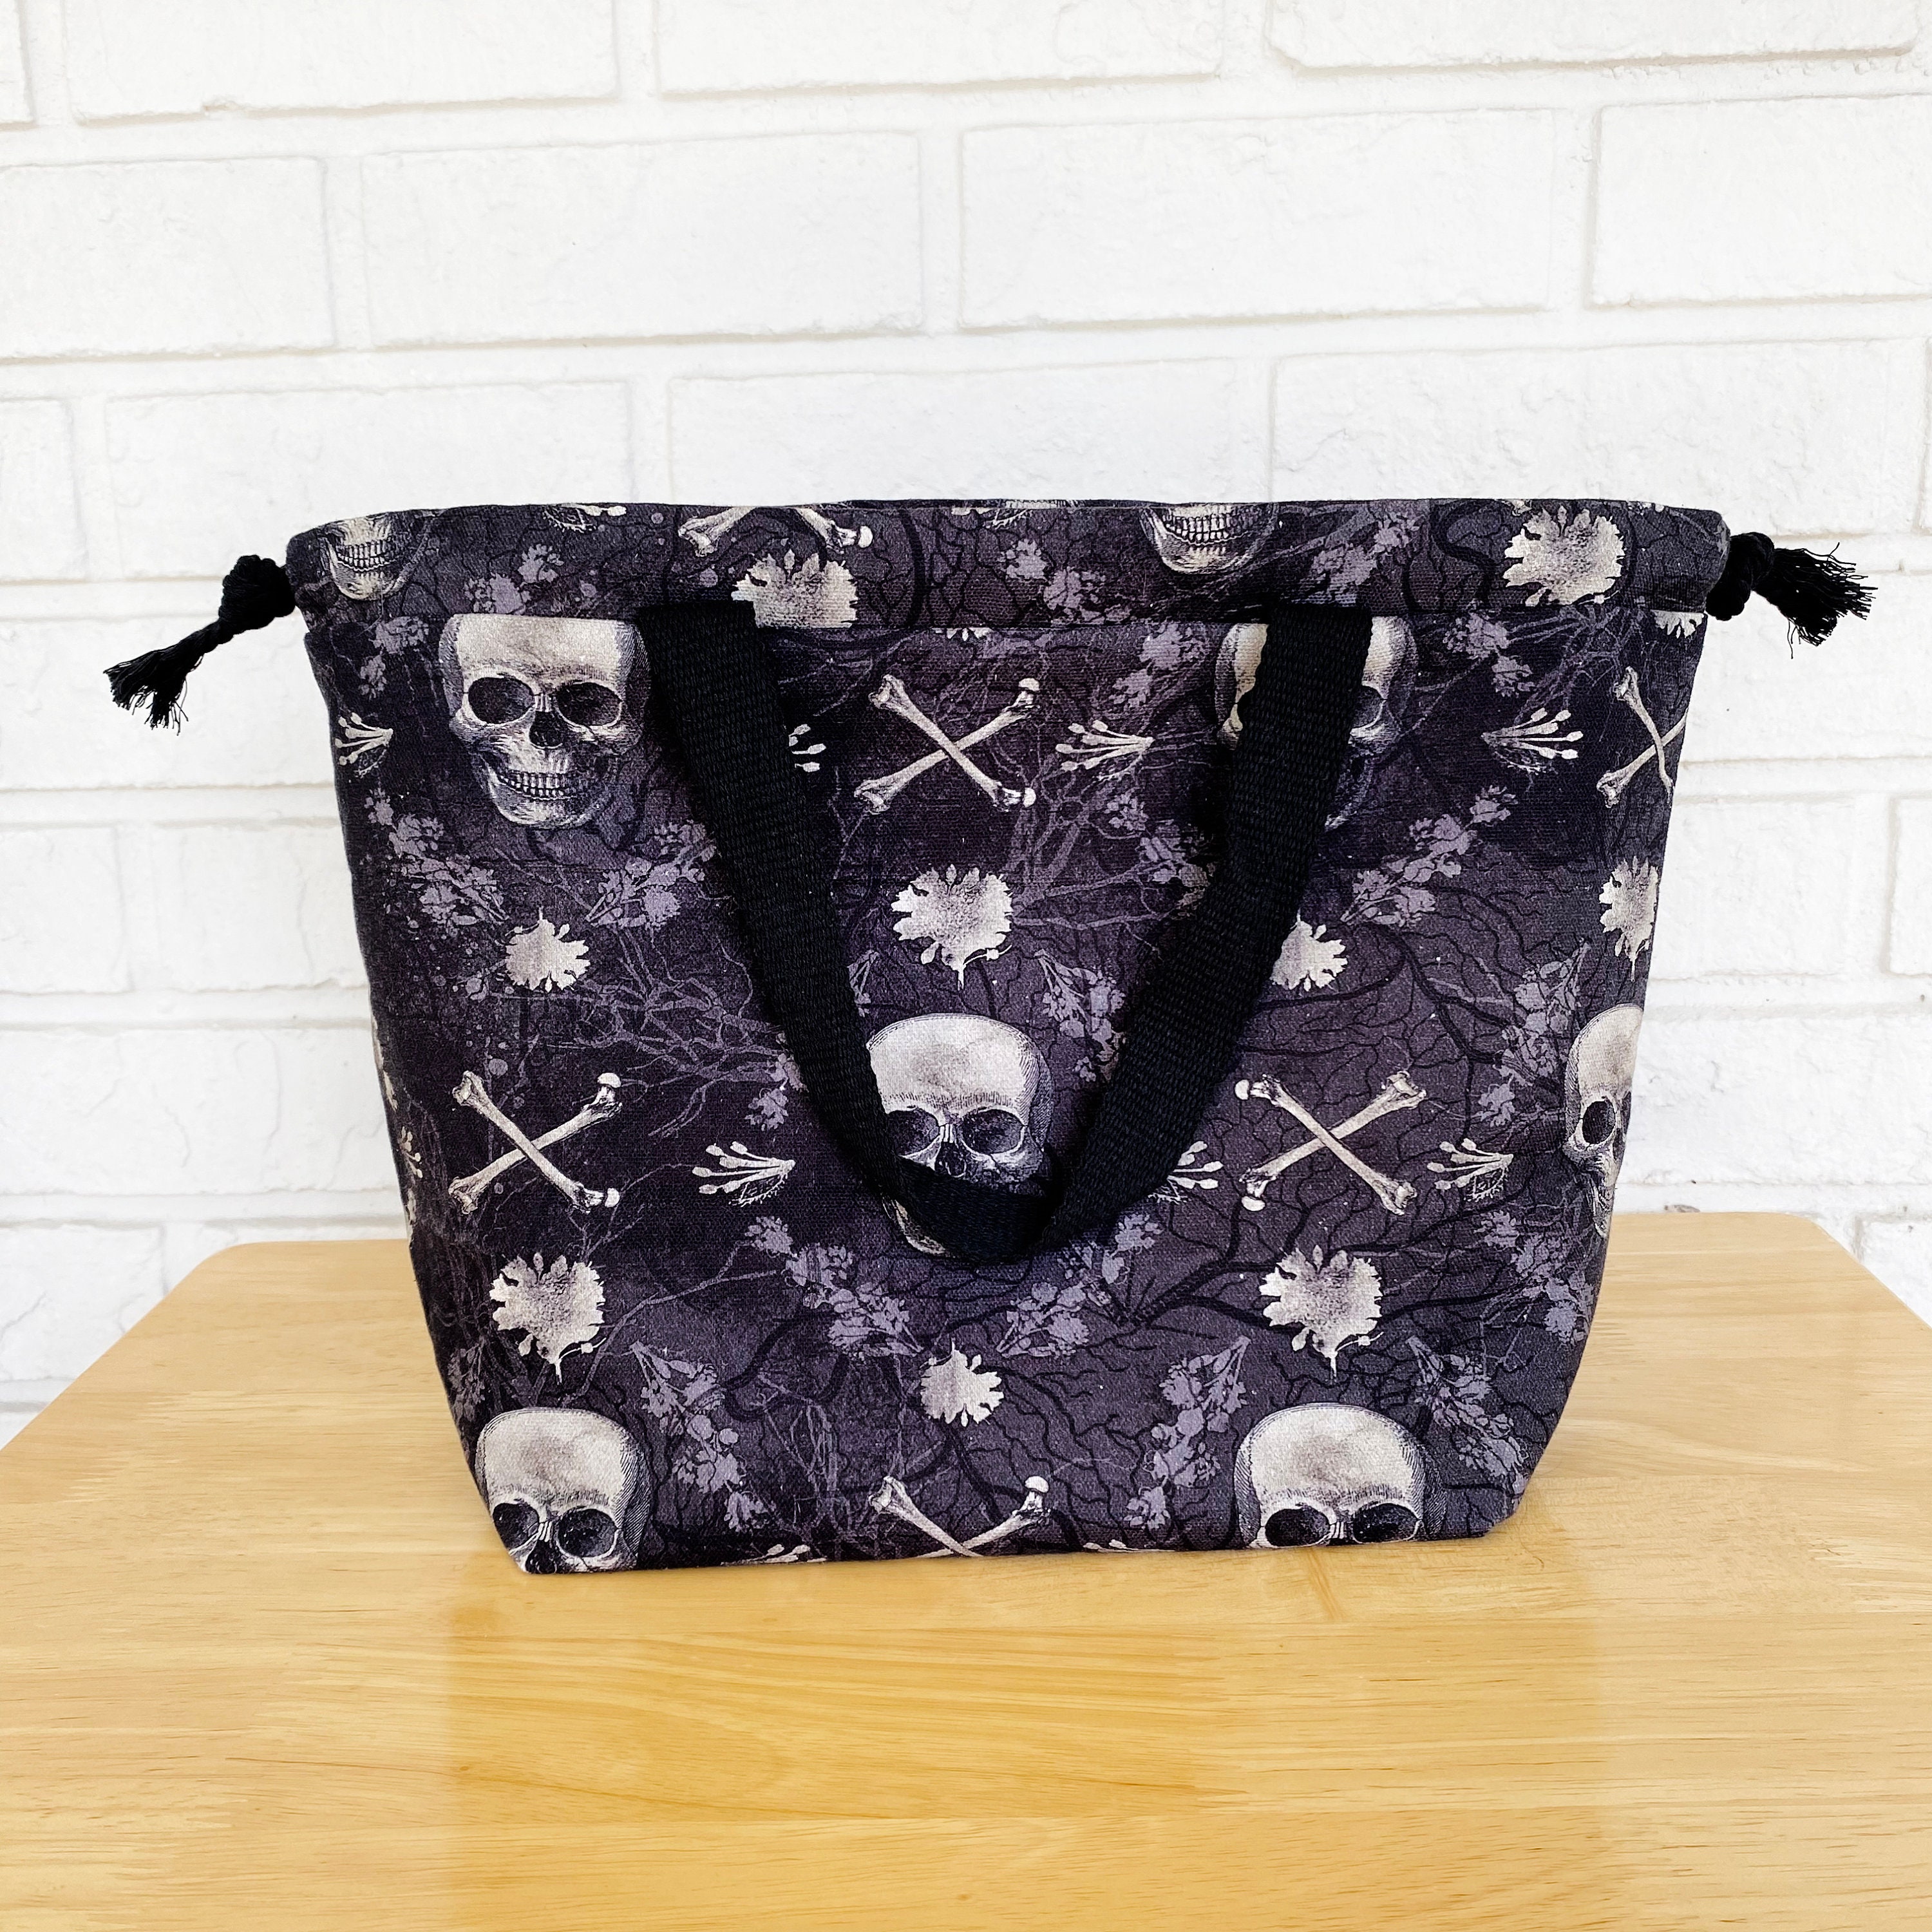 How To Knit Halloween Style Tote Bag for Sale by CroyleC